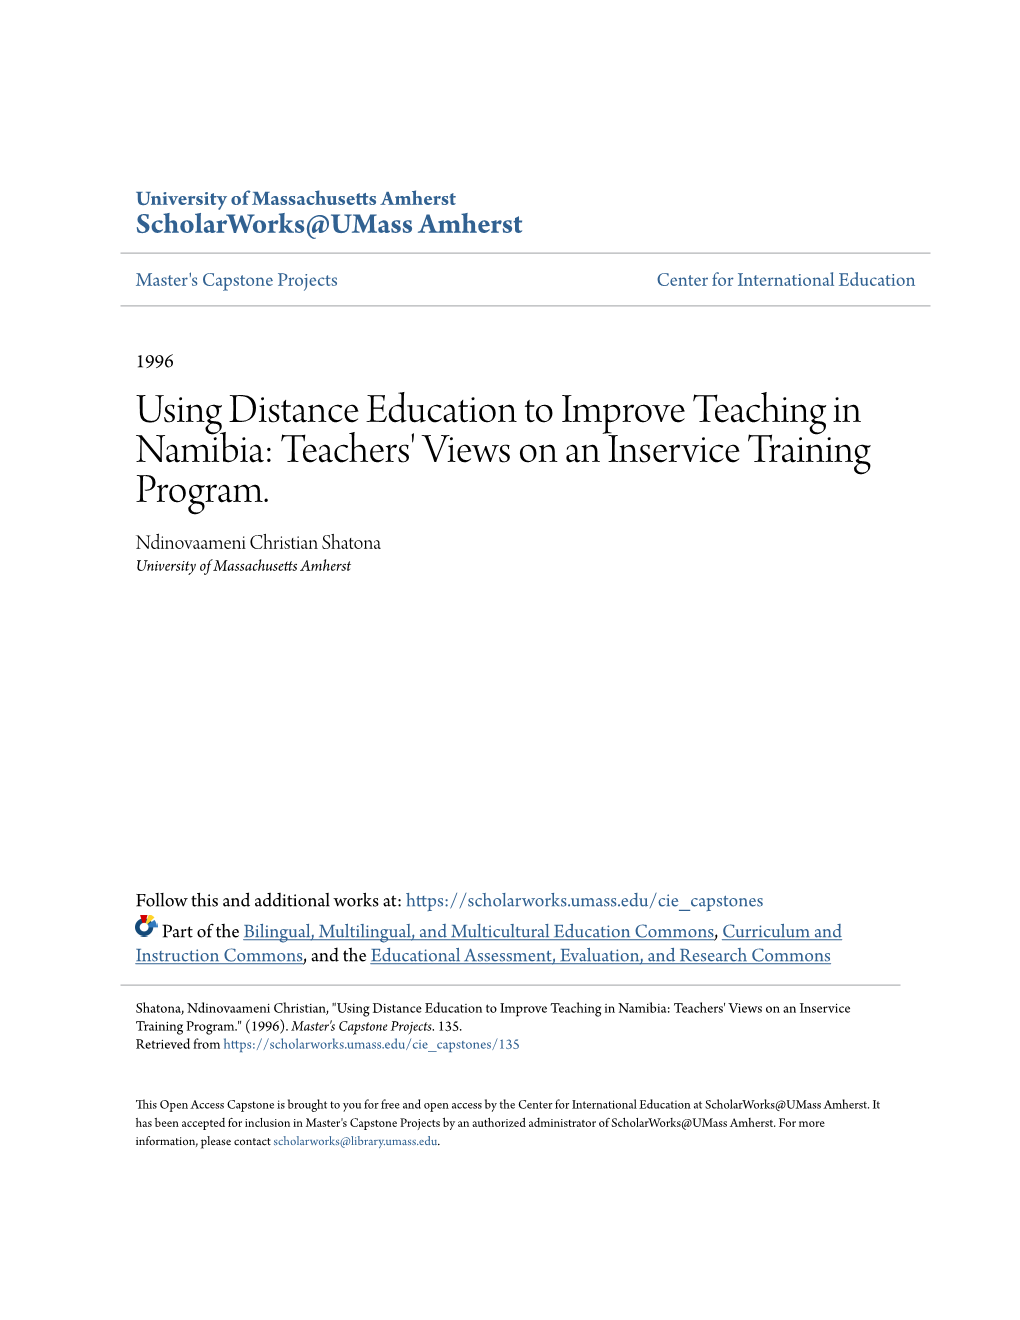 Using Distance Education to Improve Teaching in Namibia: Teachers' Views on an Inservice Training Program